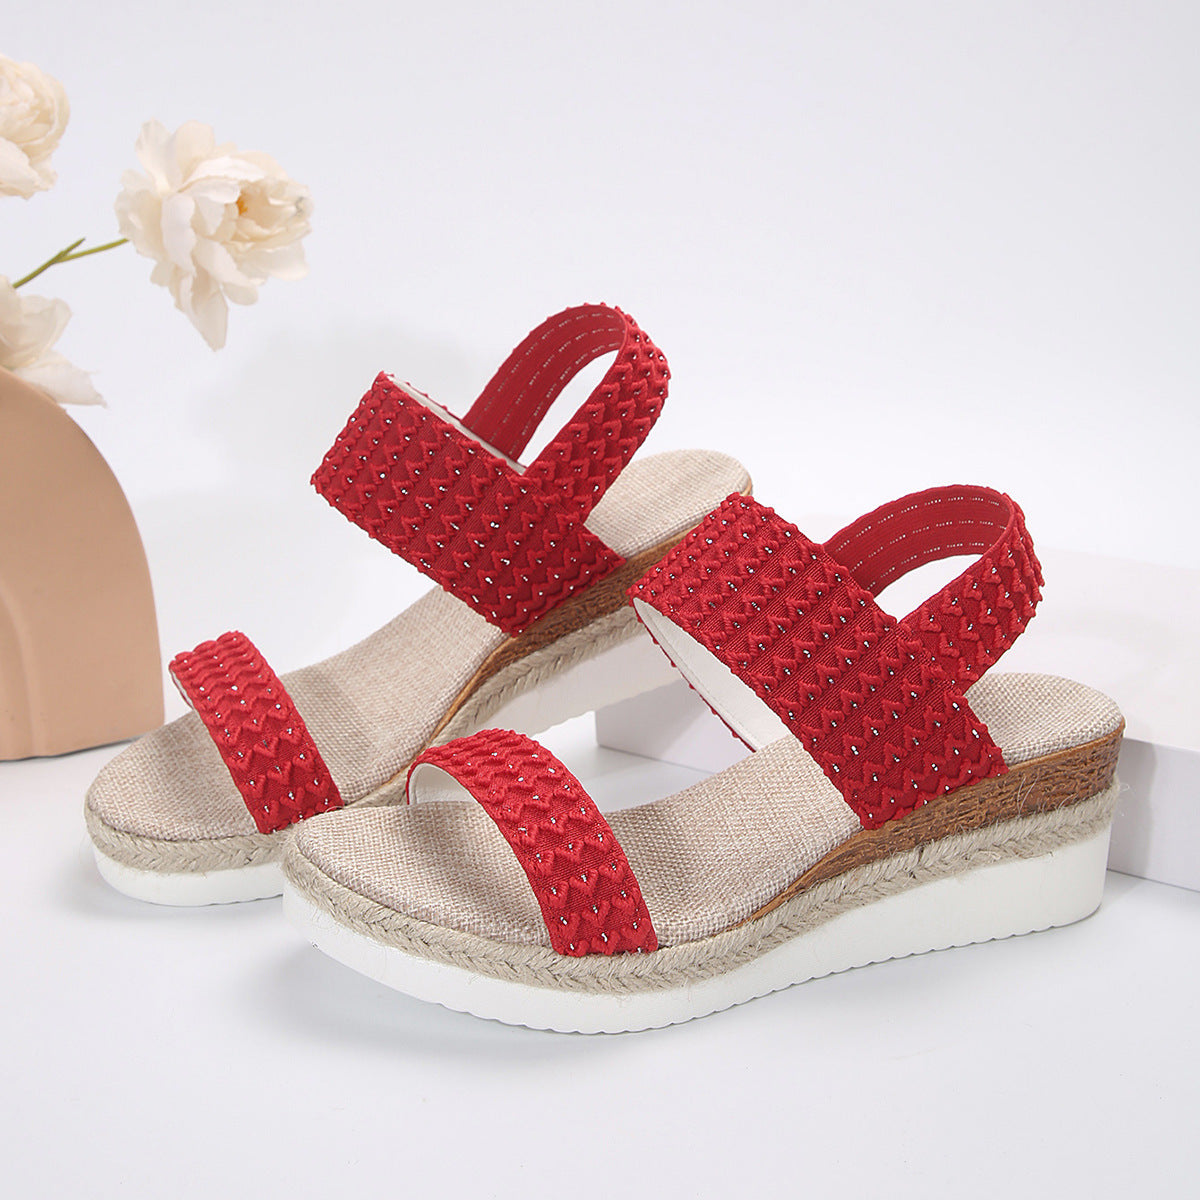 Summer Fashion Wedge Sandals For Women Peep-toe Shoes For Women